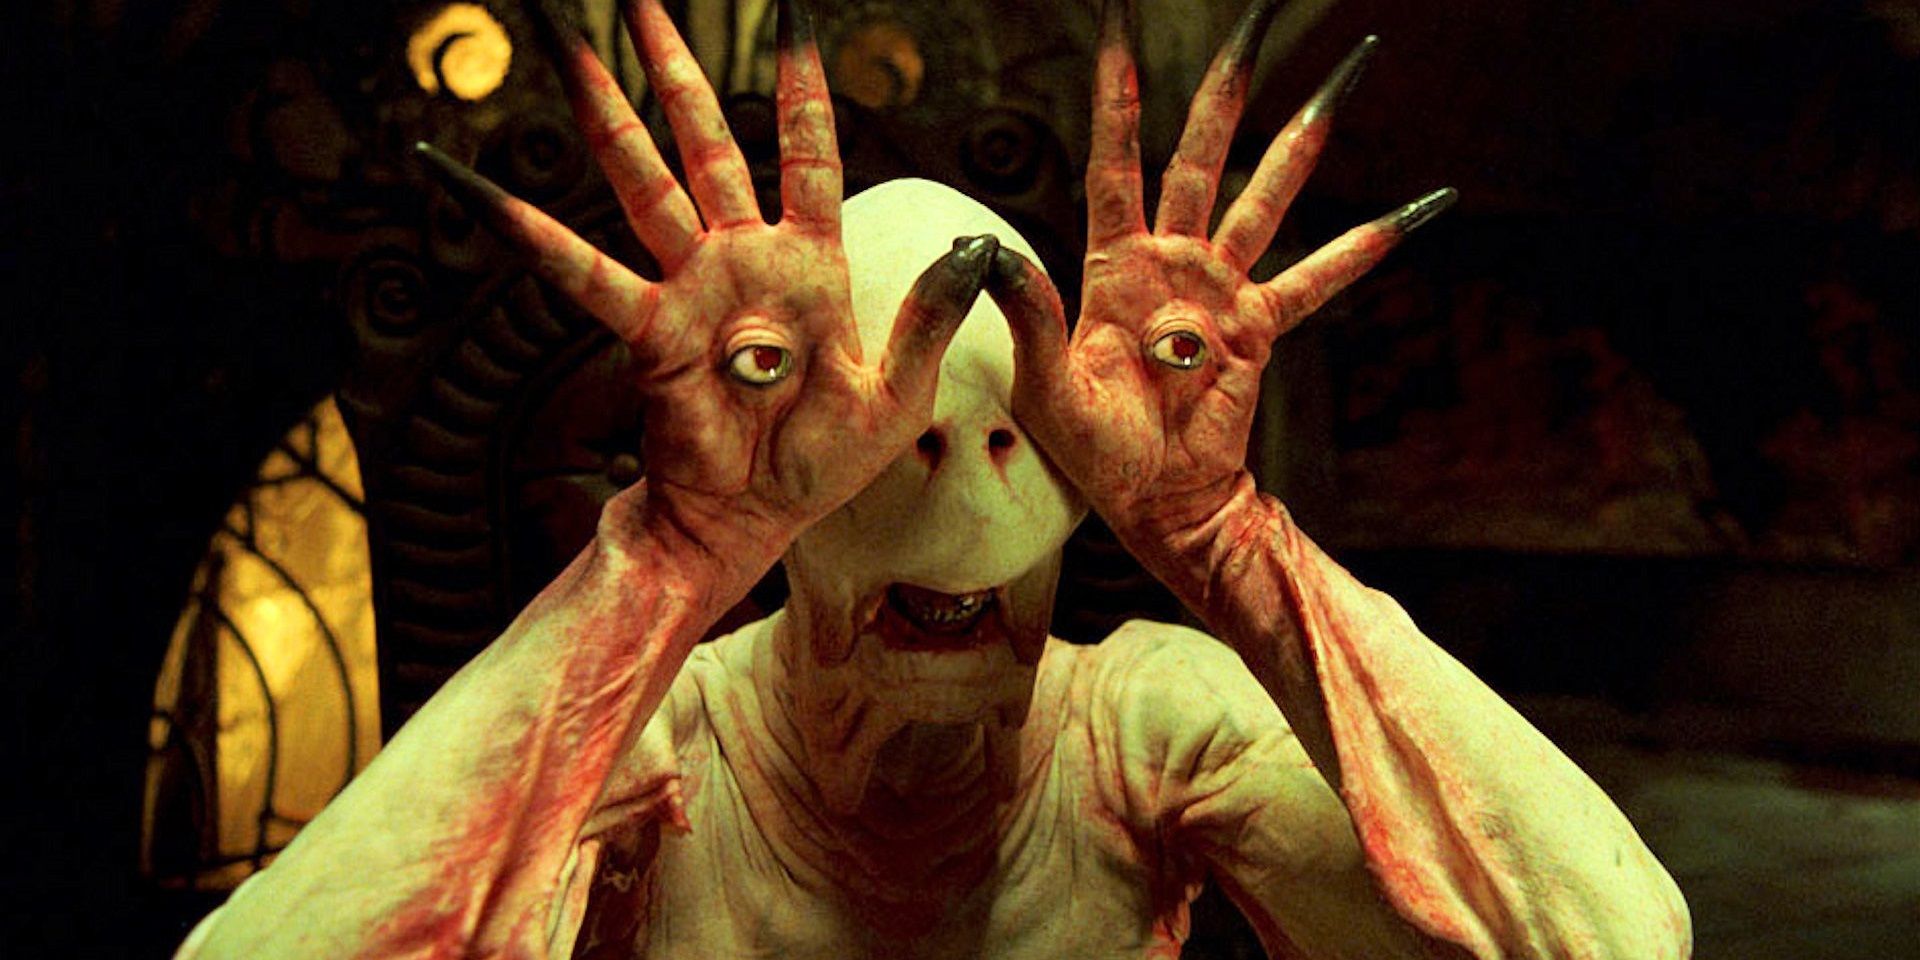 Pans Labyrinth & 9 Other Fantasy Movies With Social Commentary